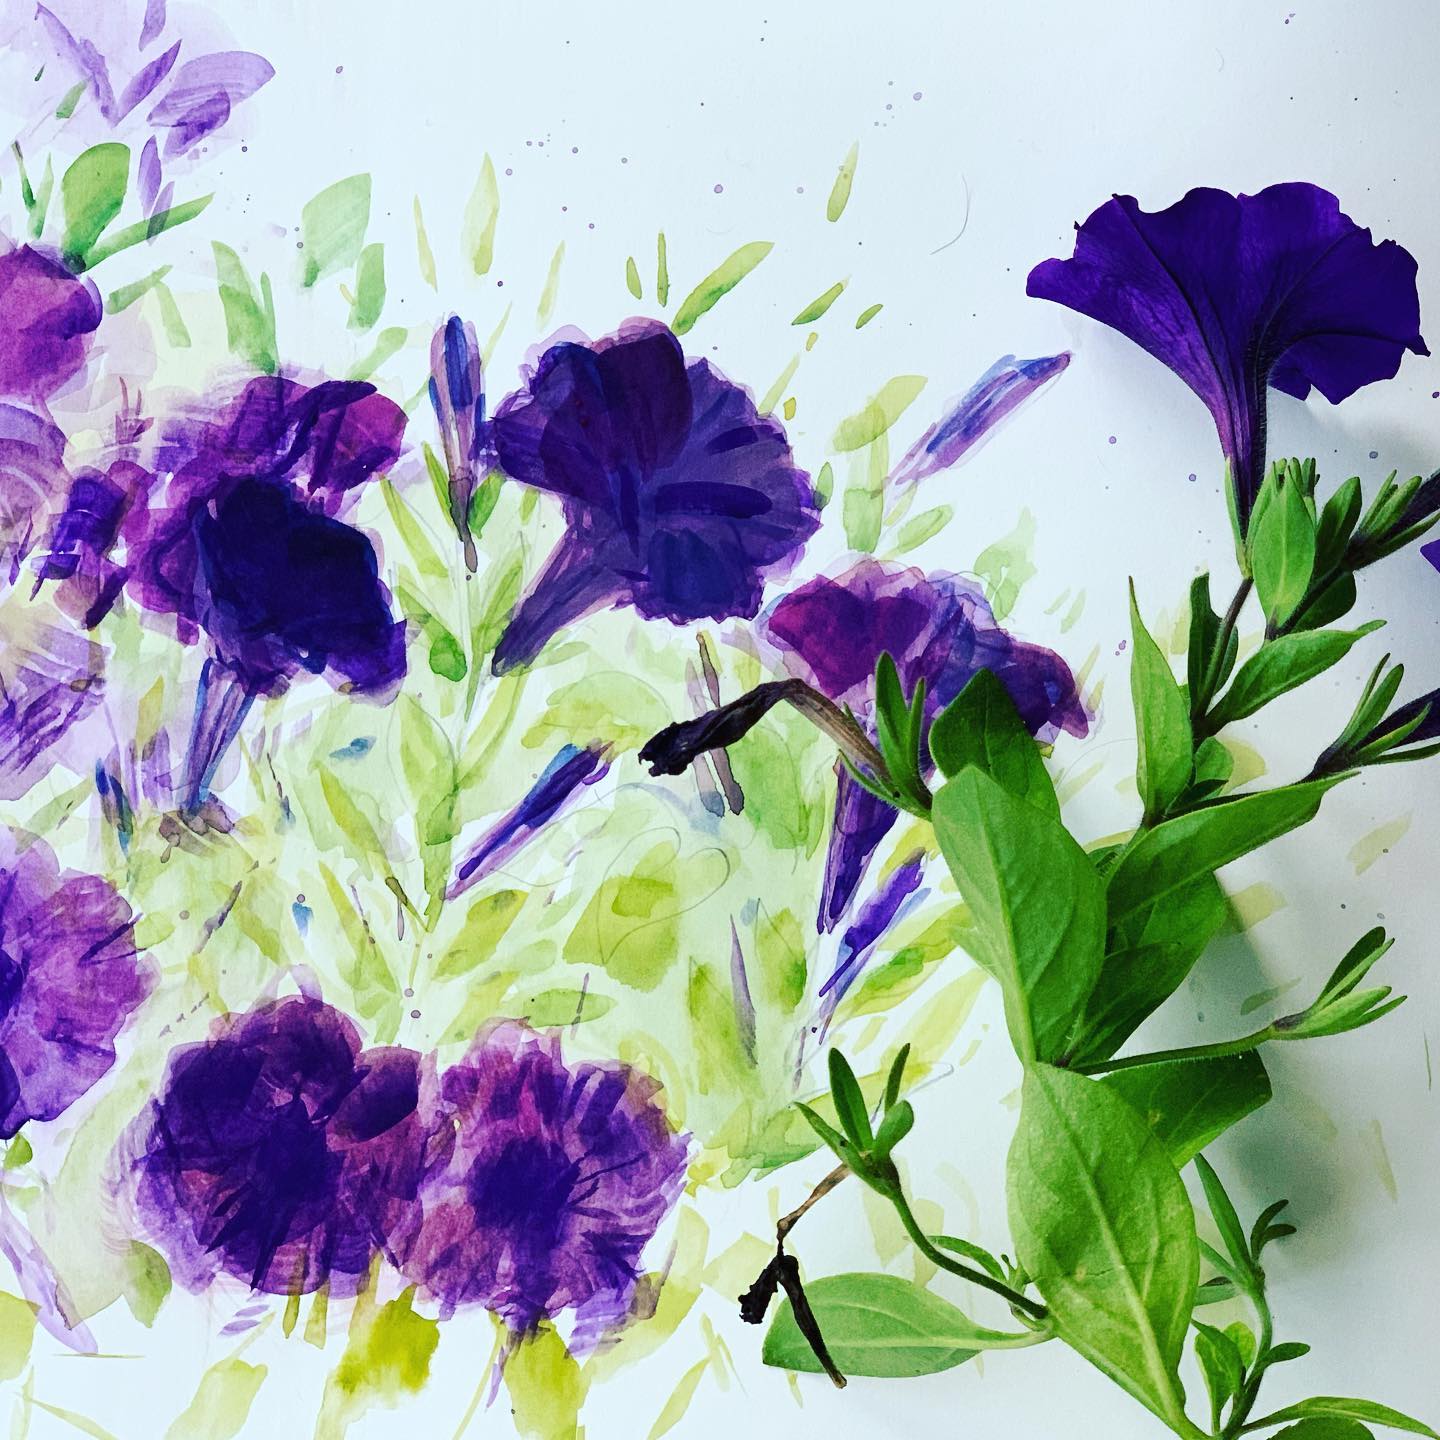 Purple petunias symbolize fantasy, charm, and mystery. Thoroughly enjoyed ‘capturing their charm’ today!